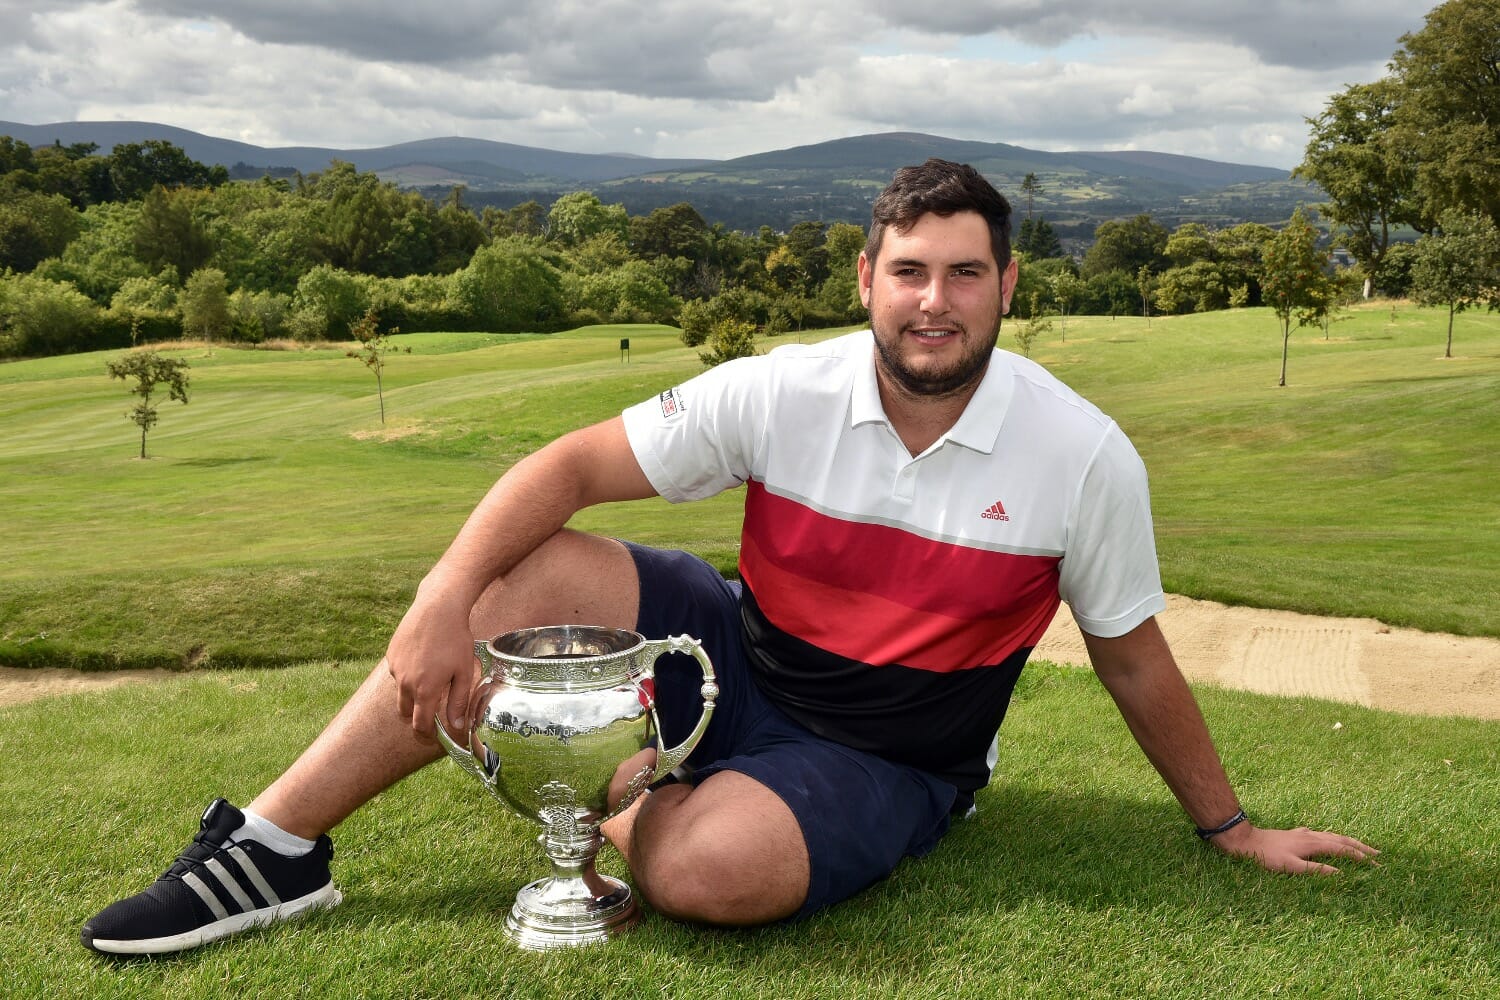 Greenberg and Doyle take the titles at Students Amateur Open